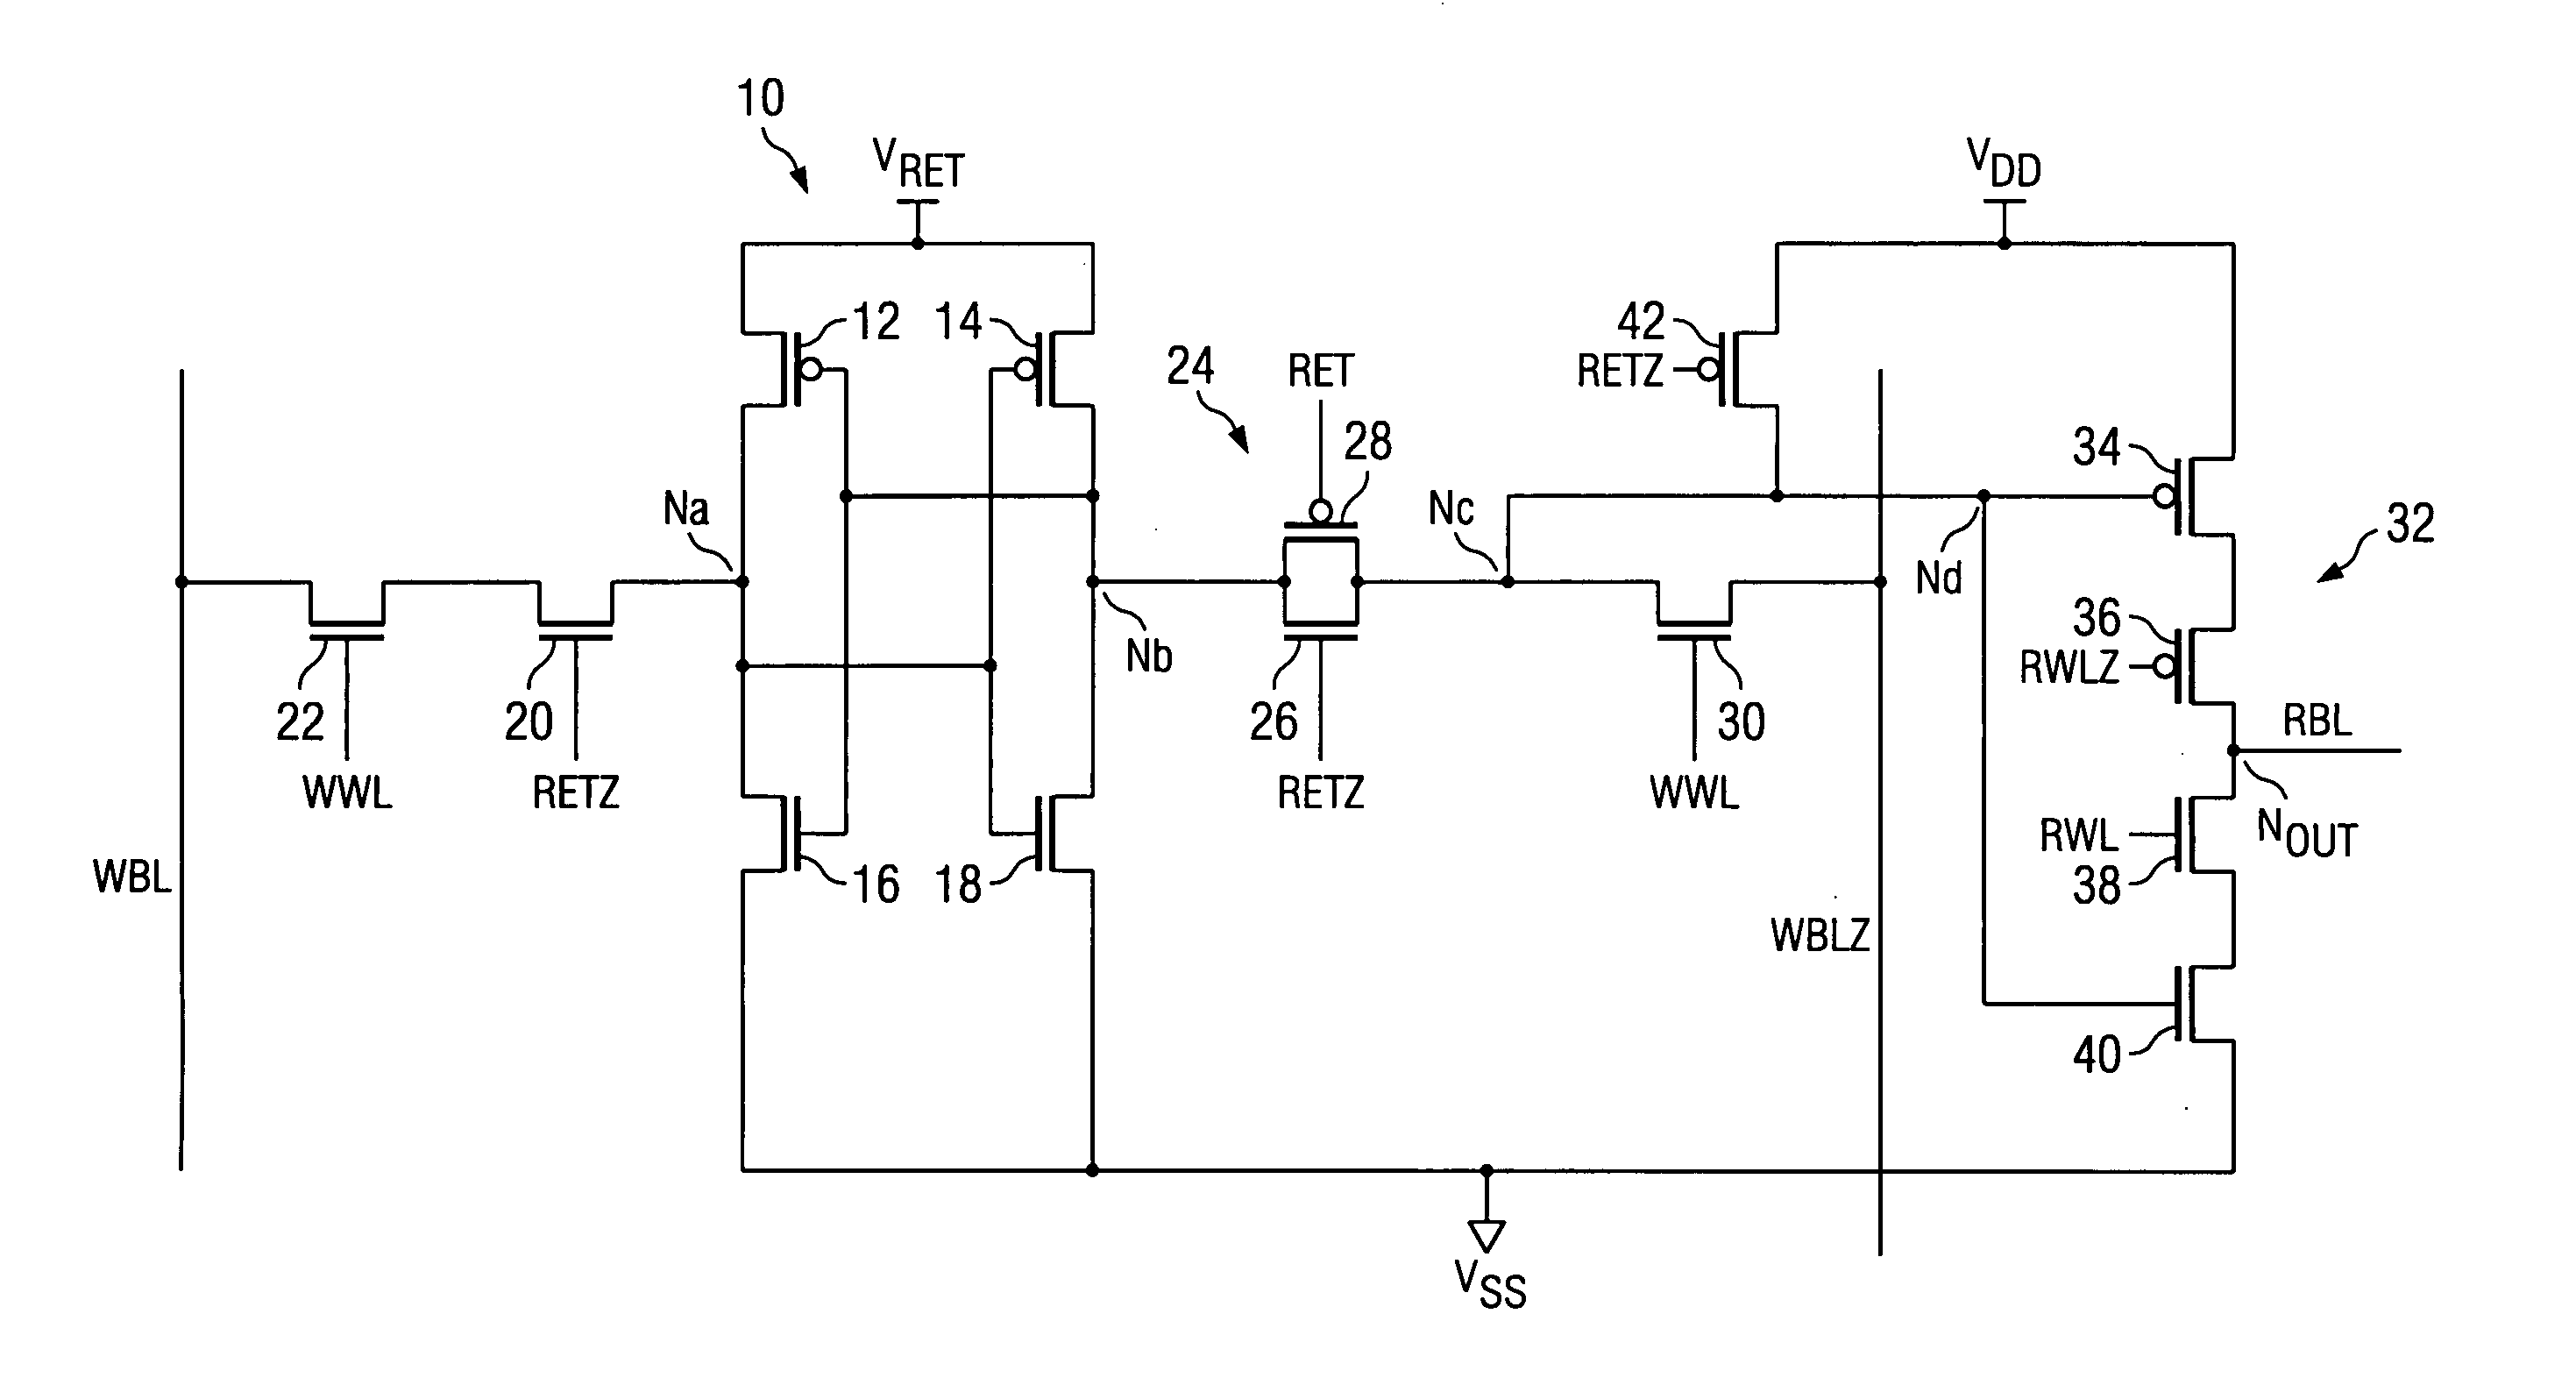 Semiconductor device having a data latching or storing function